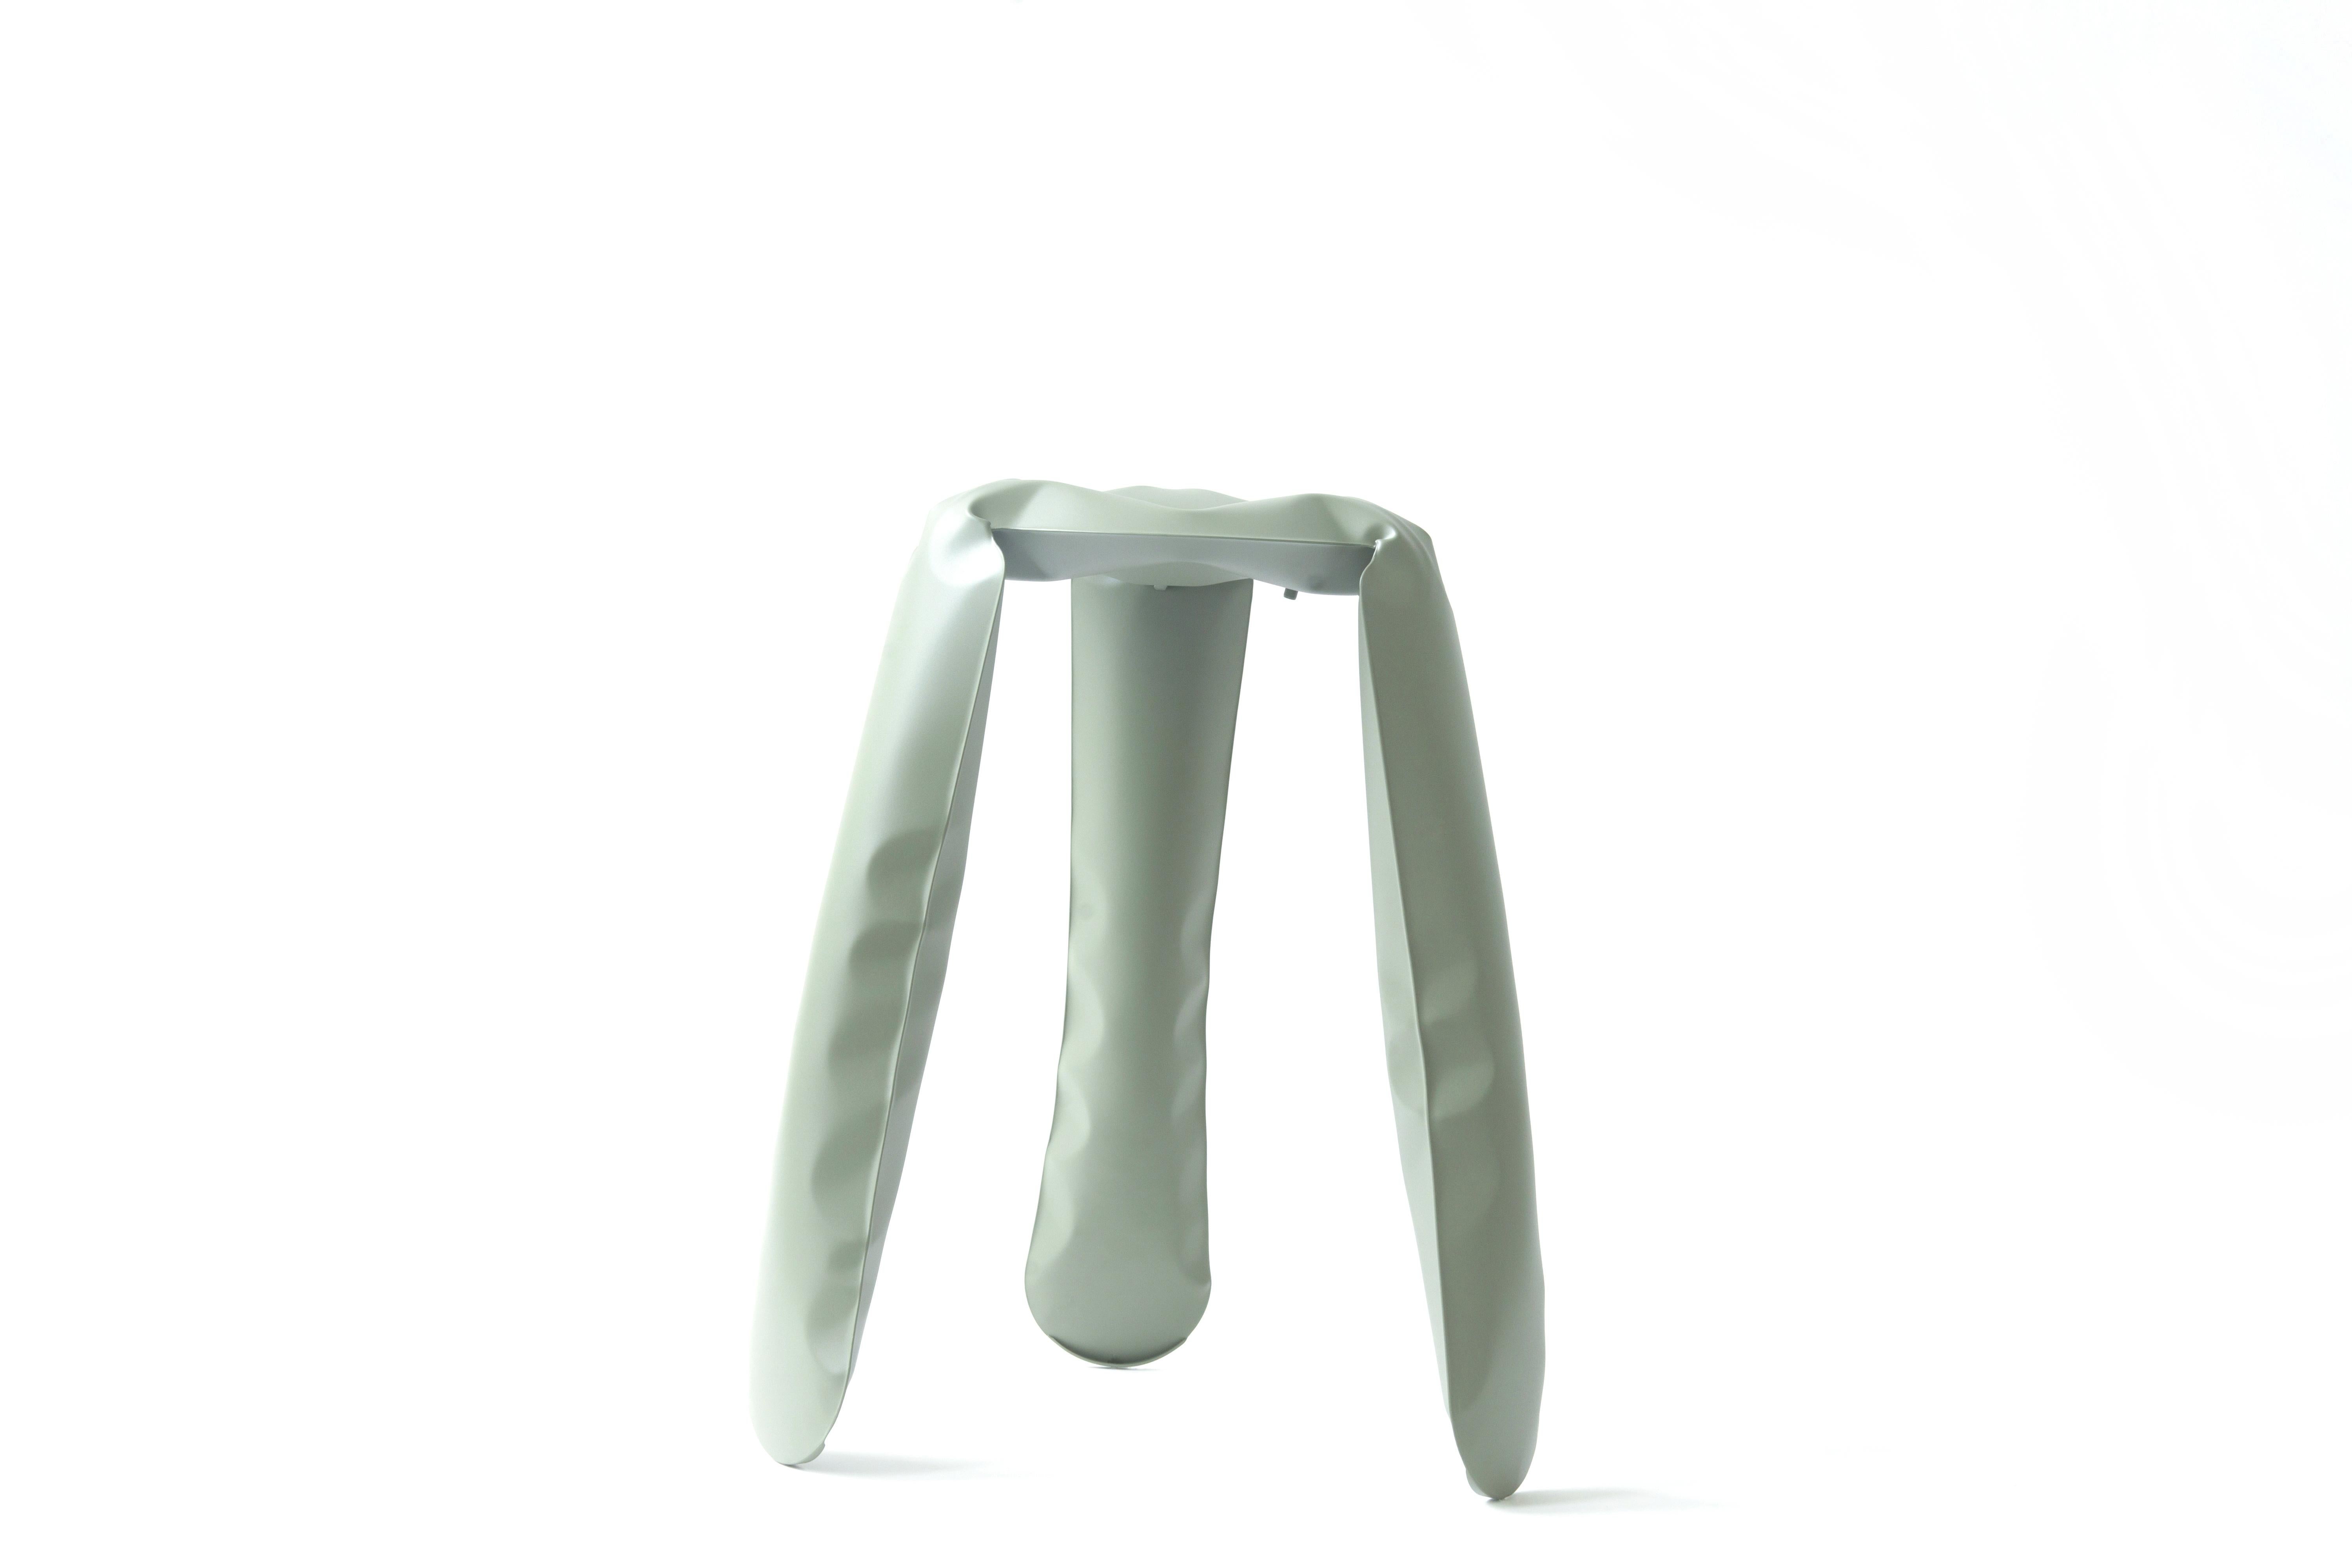 Moss Gray Steel Kitchen Plopp stool by Zieta
Dimensions: D35 x H 65 cm 
Material: Carbon steel. 
Finish: Powder-coated. 
Available in colors: Beige, black, blue, graphite, moss, umbra gray, and flamed gold. Available in Stainless Steel, Aluminum,